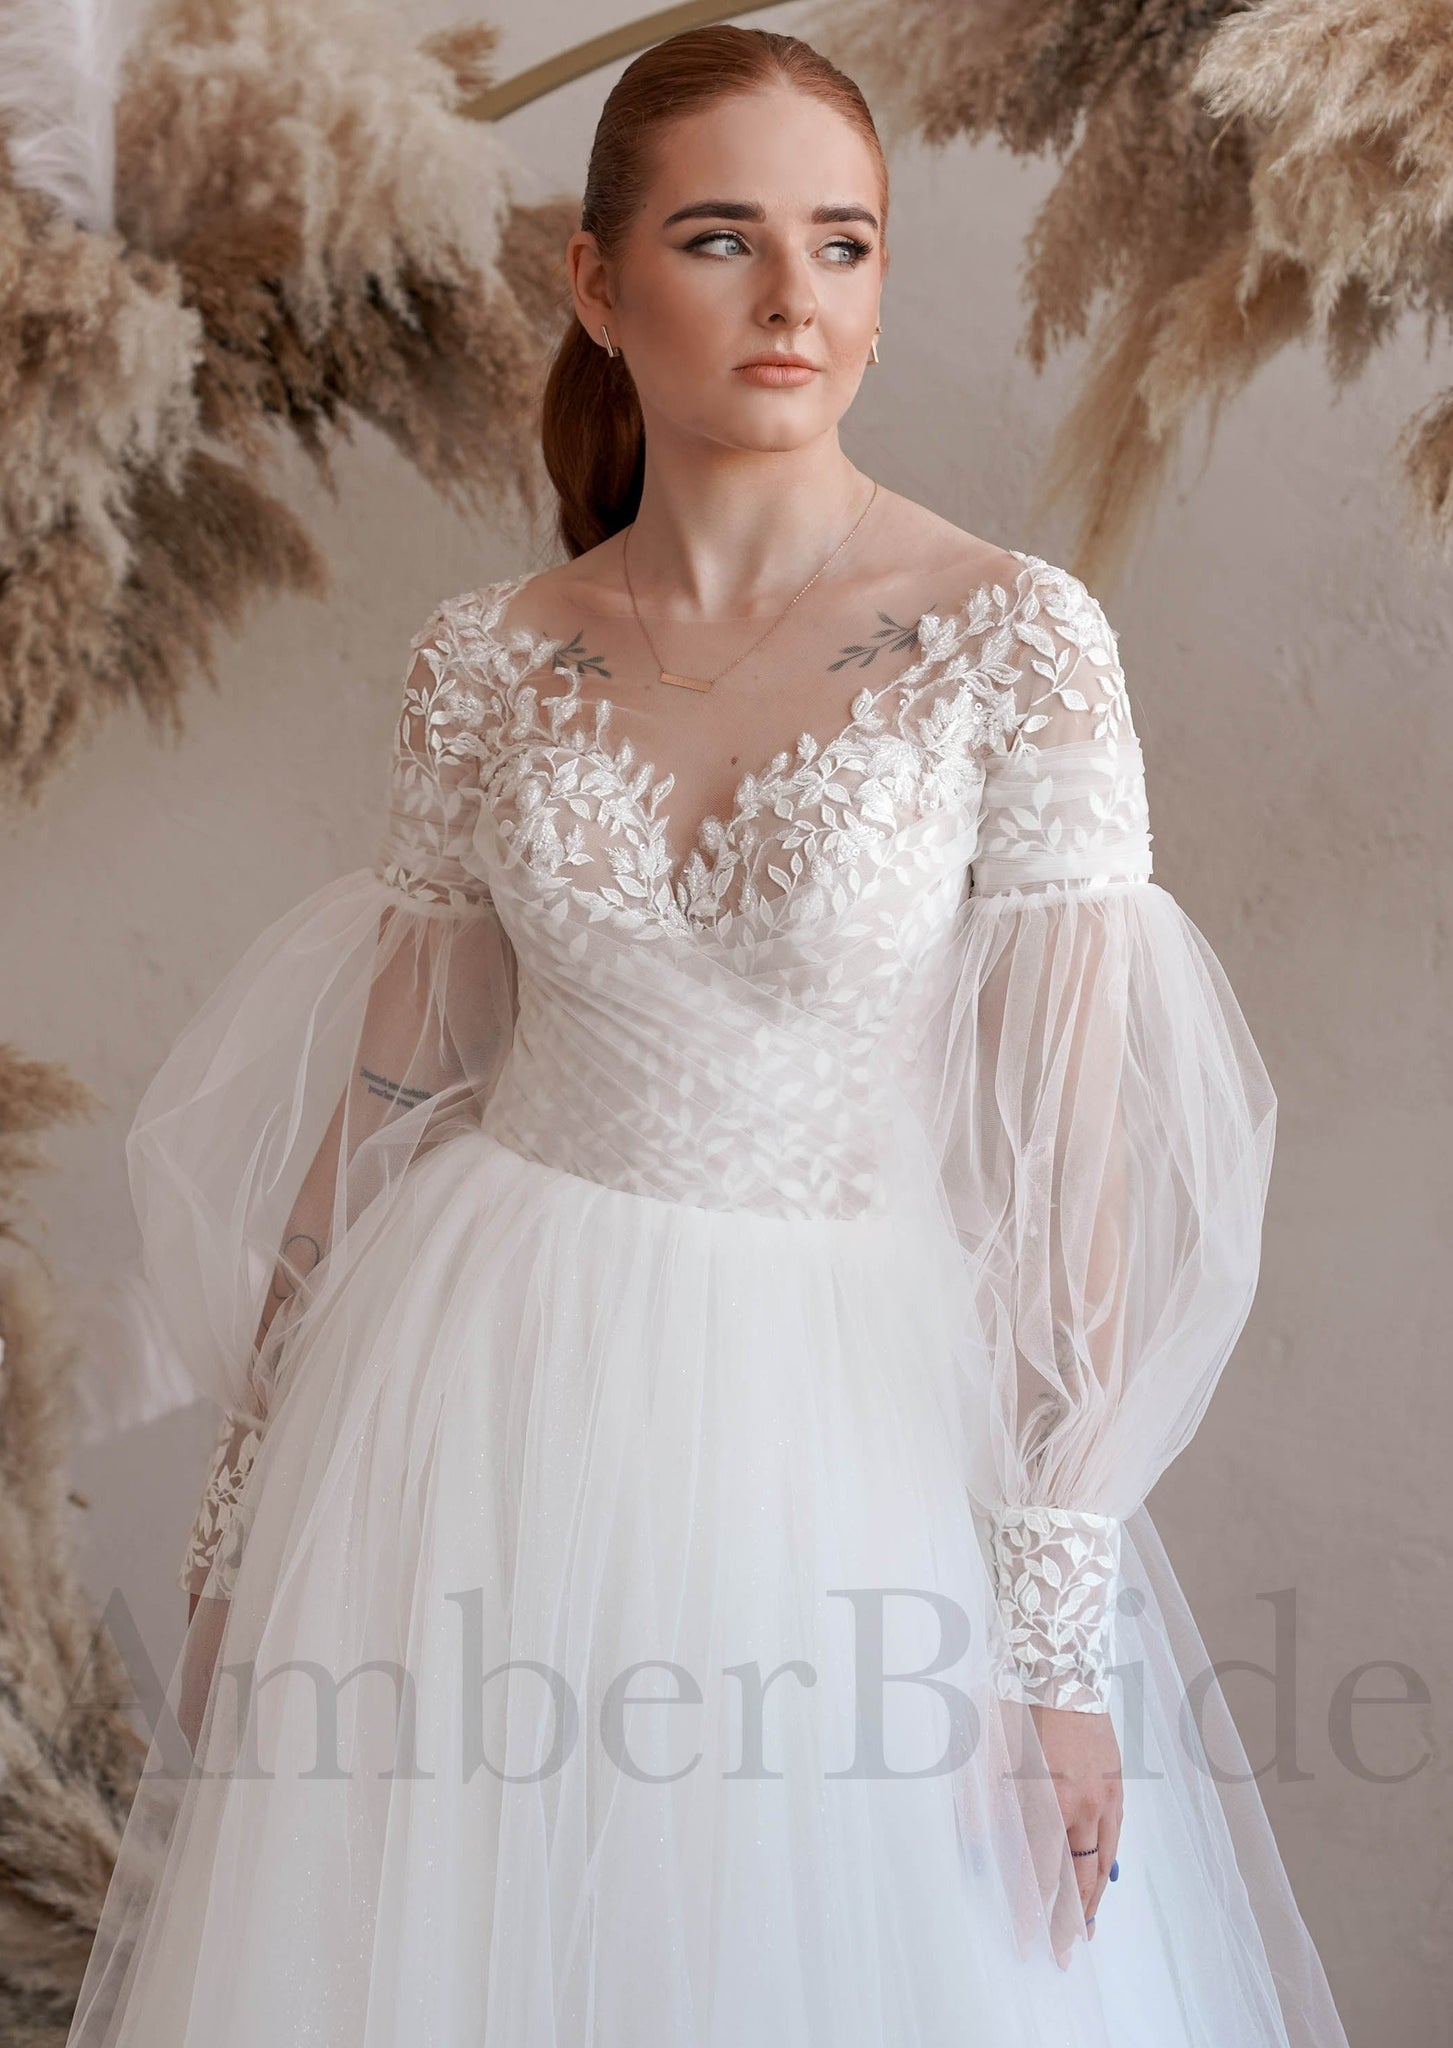 Rustic Floral Top Wedding Dress with Illusion Design and Long Puffy Sleeves